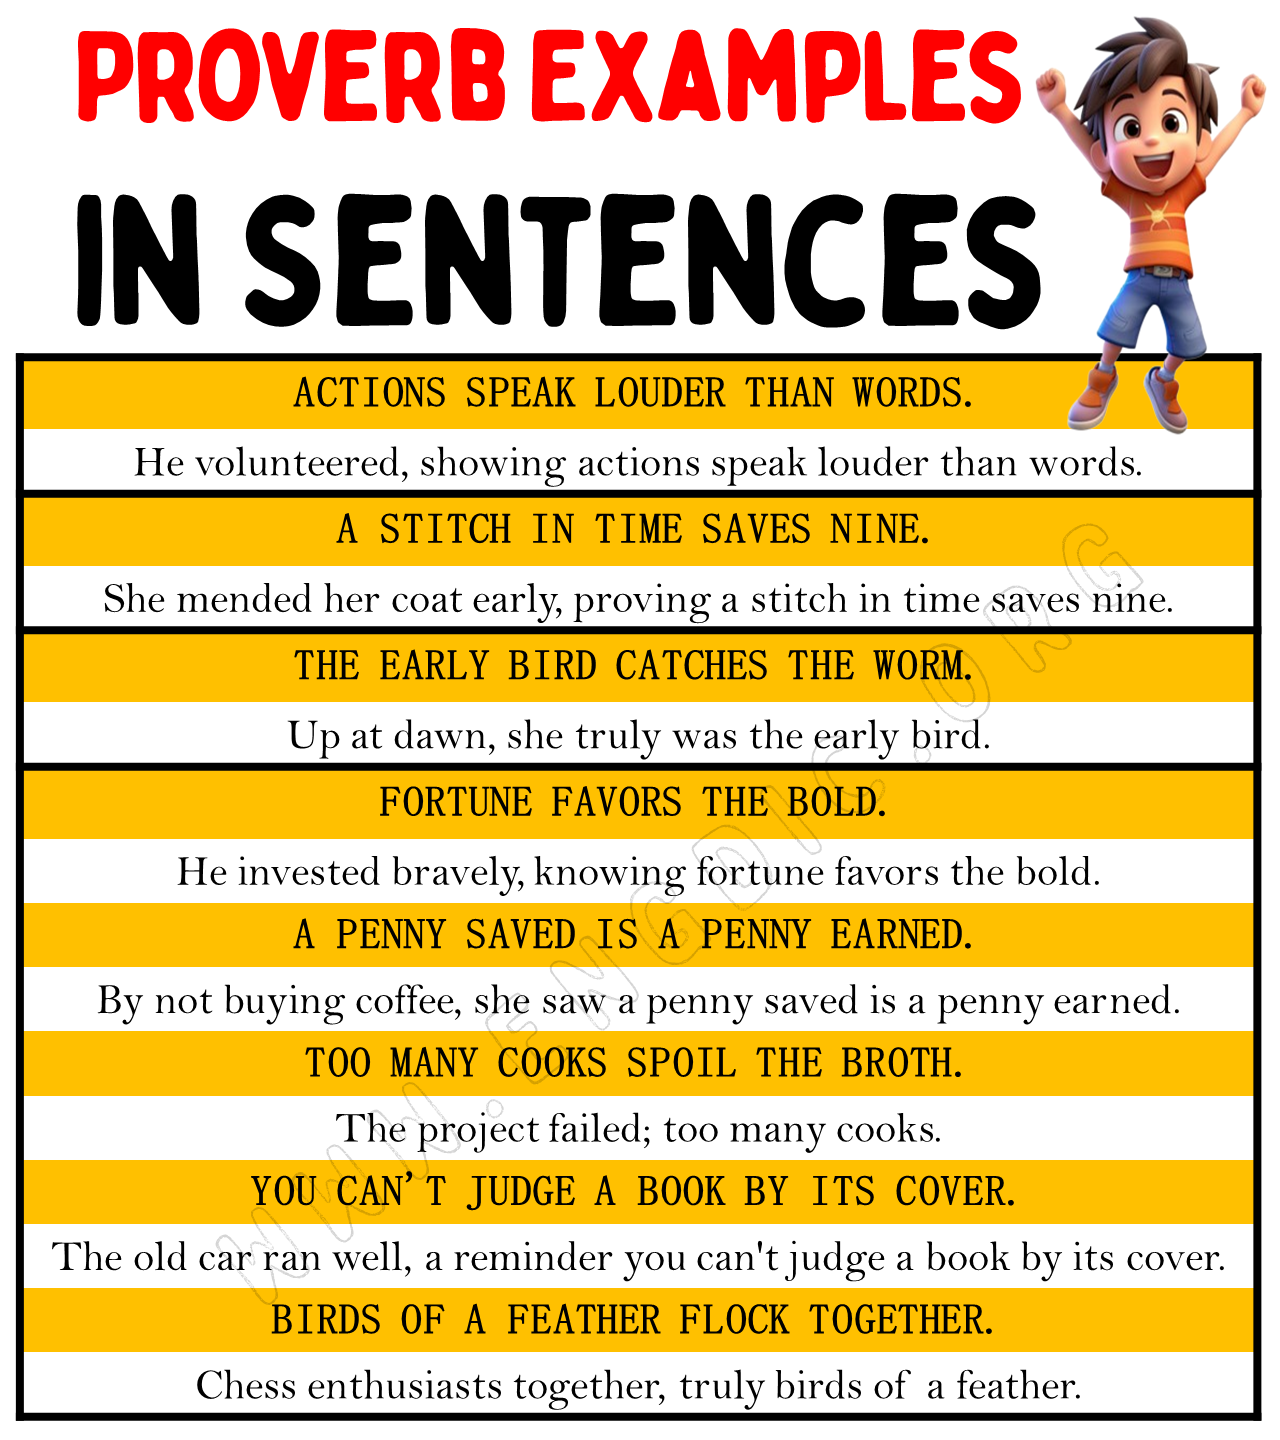 Proverbs Examples in Sentences